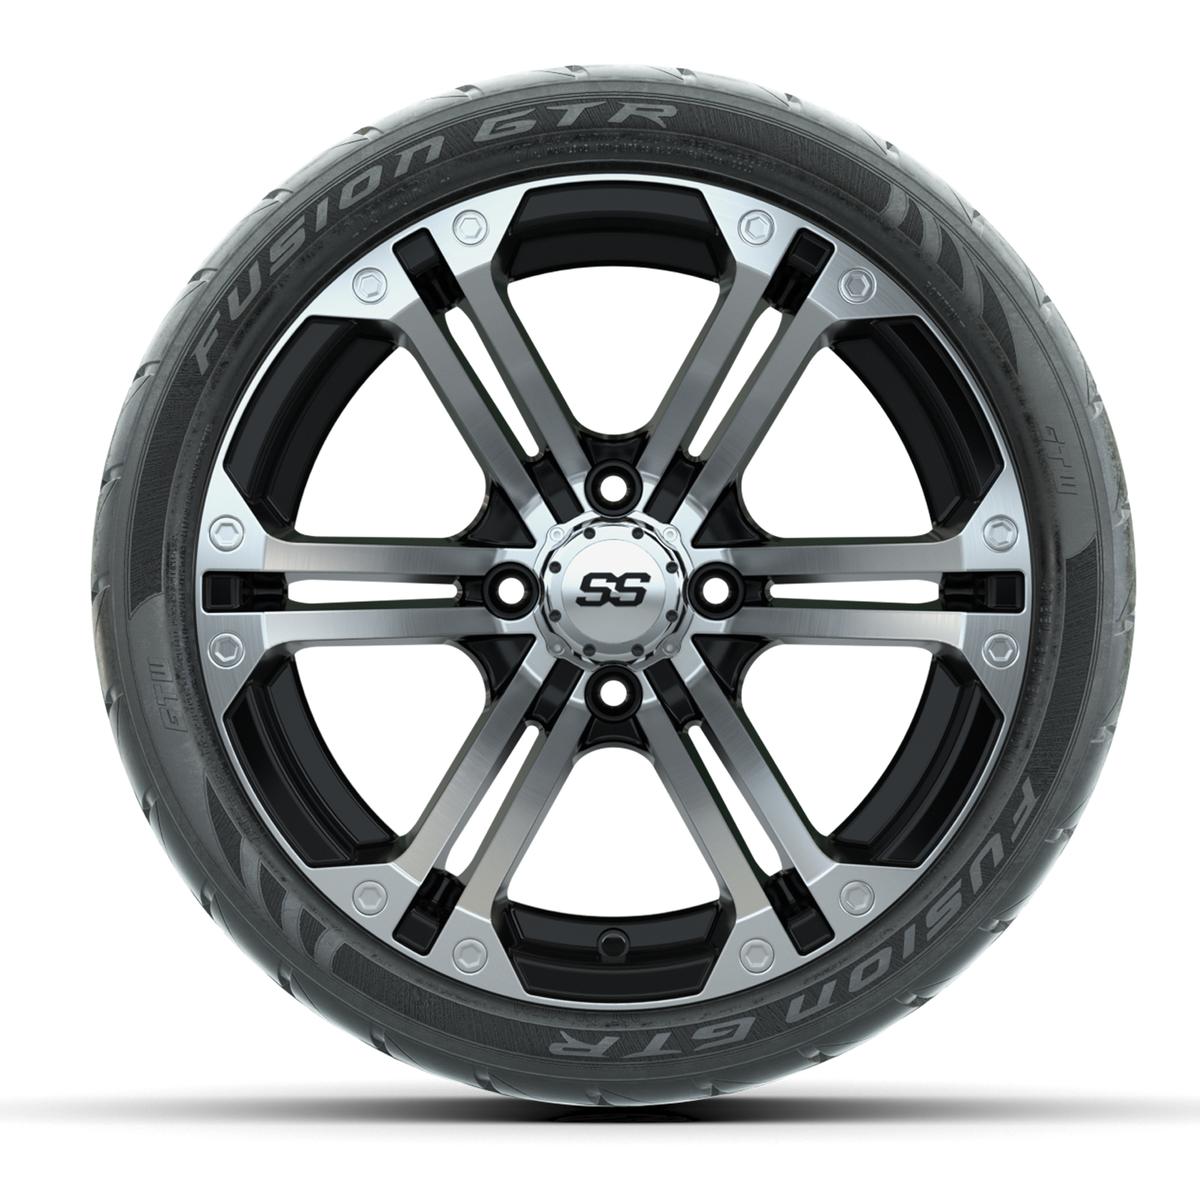 14” GTW Specter Machined/Black Wheels with Fusion GTR Street Tires – Set of 4